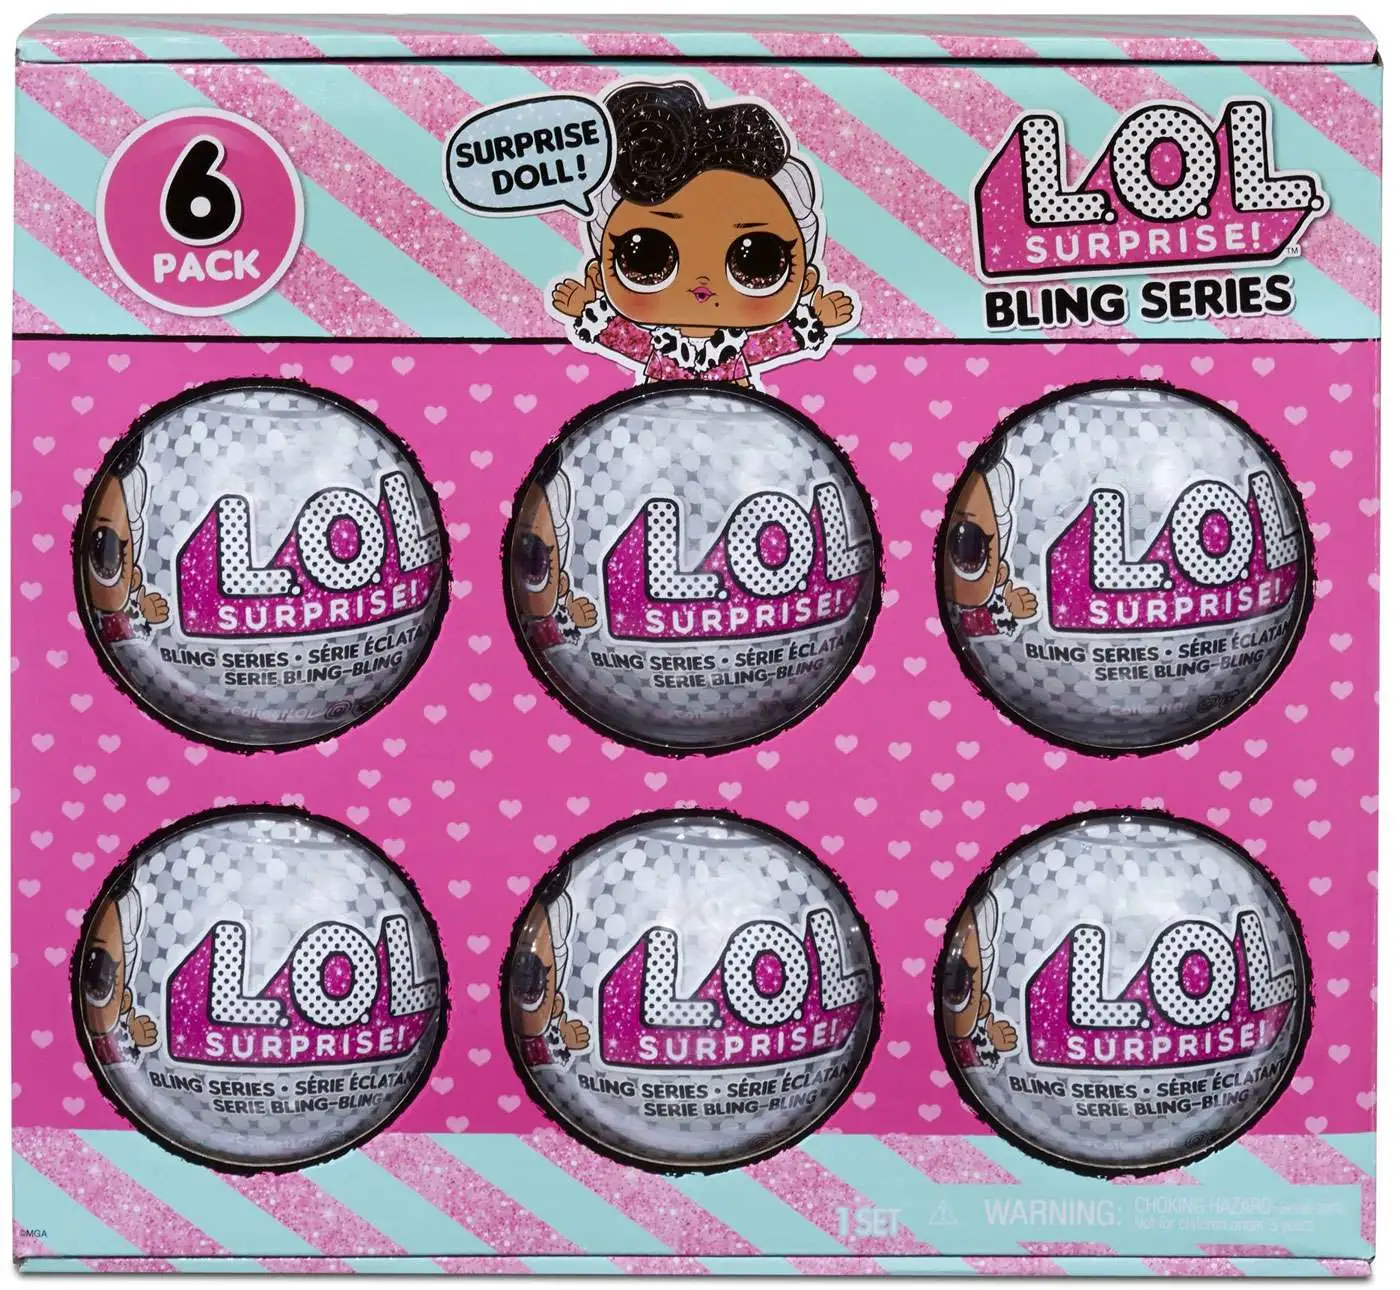 Genuine LOL by MGA Entertainment Surprise! L.O.L Bling Series Doll 